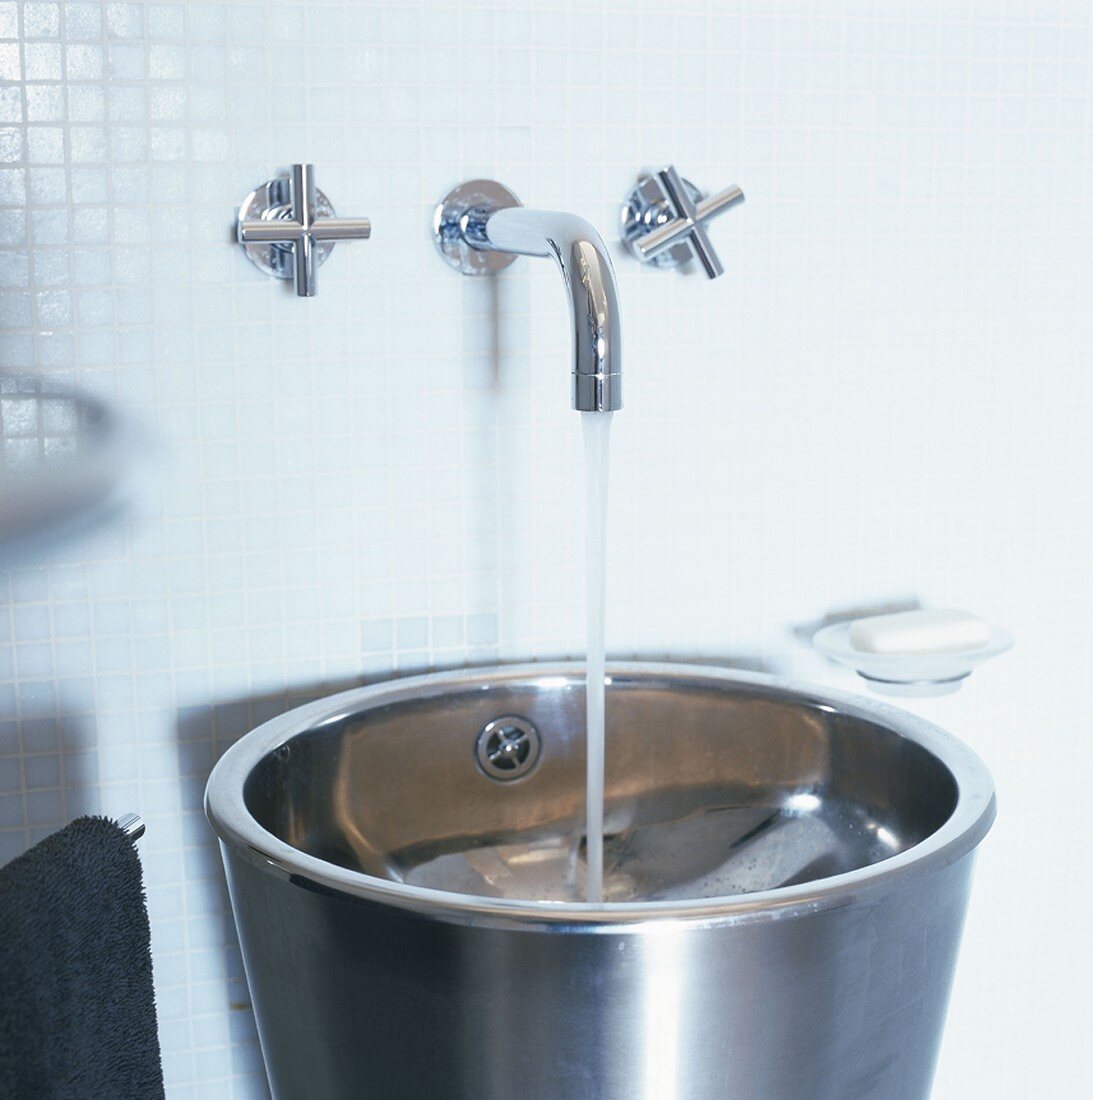 A stainless steel wash basin